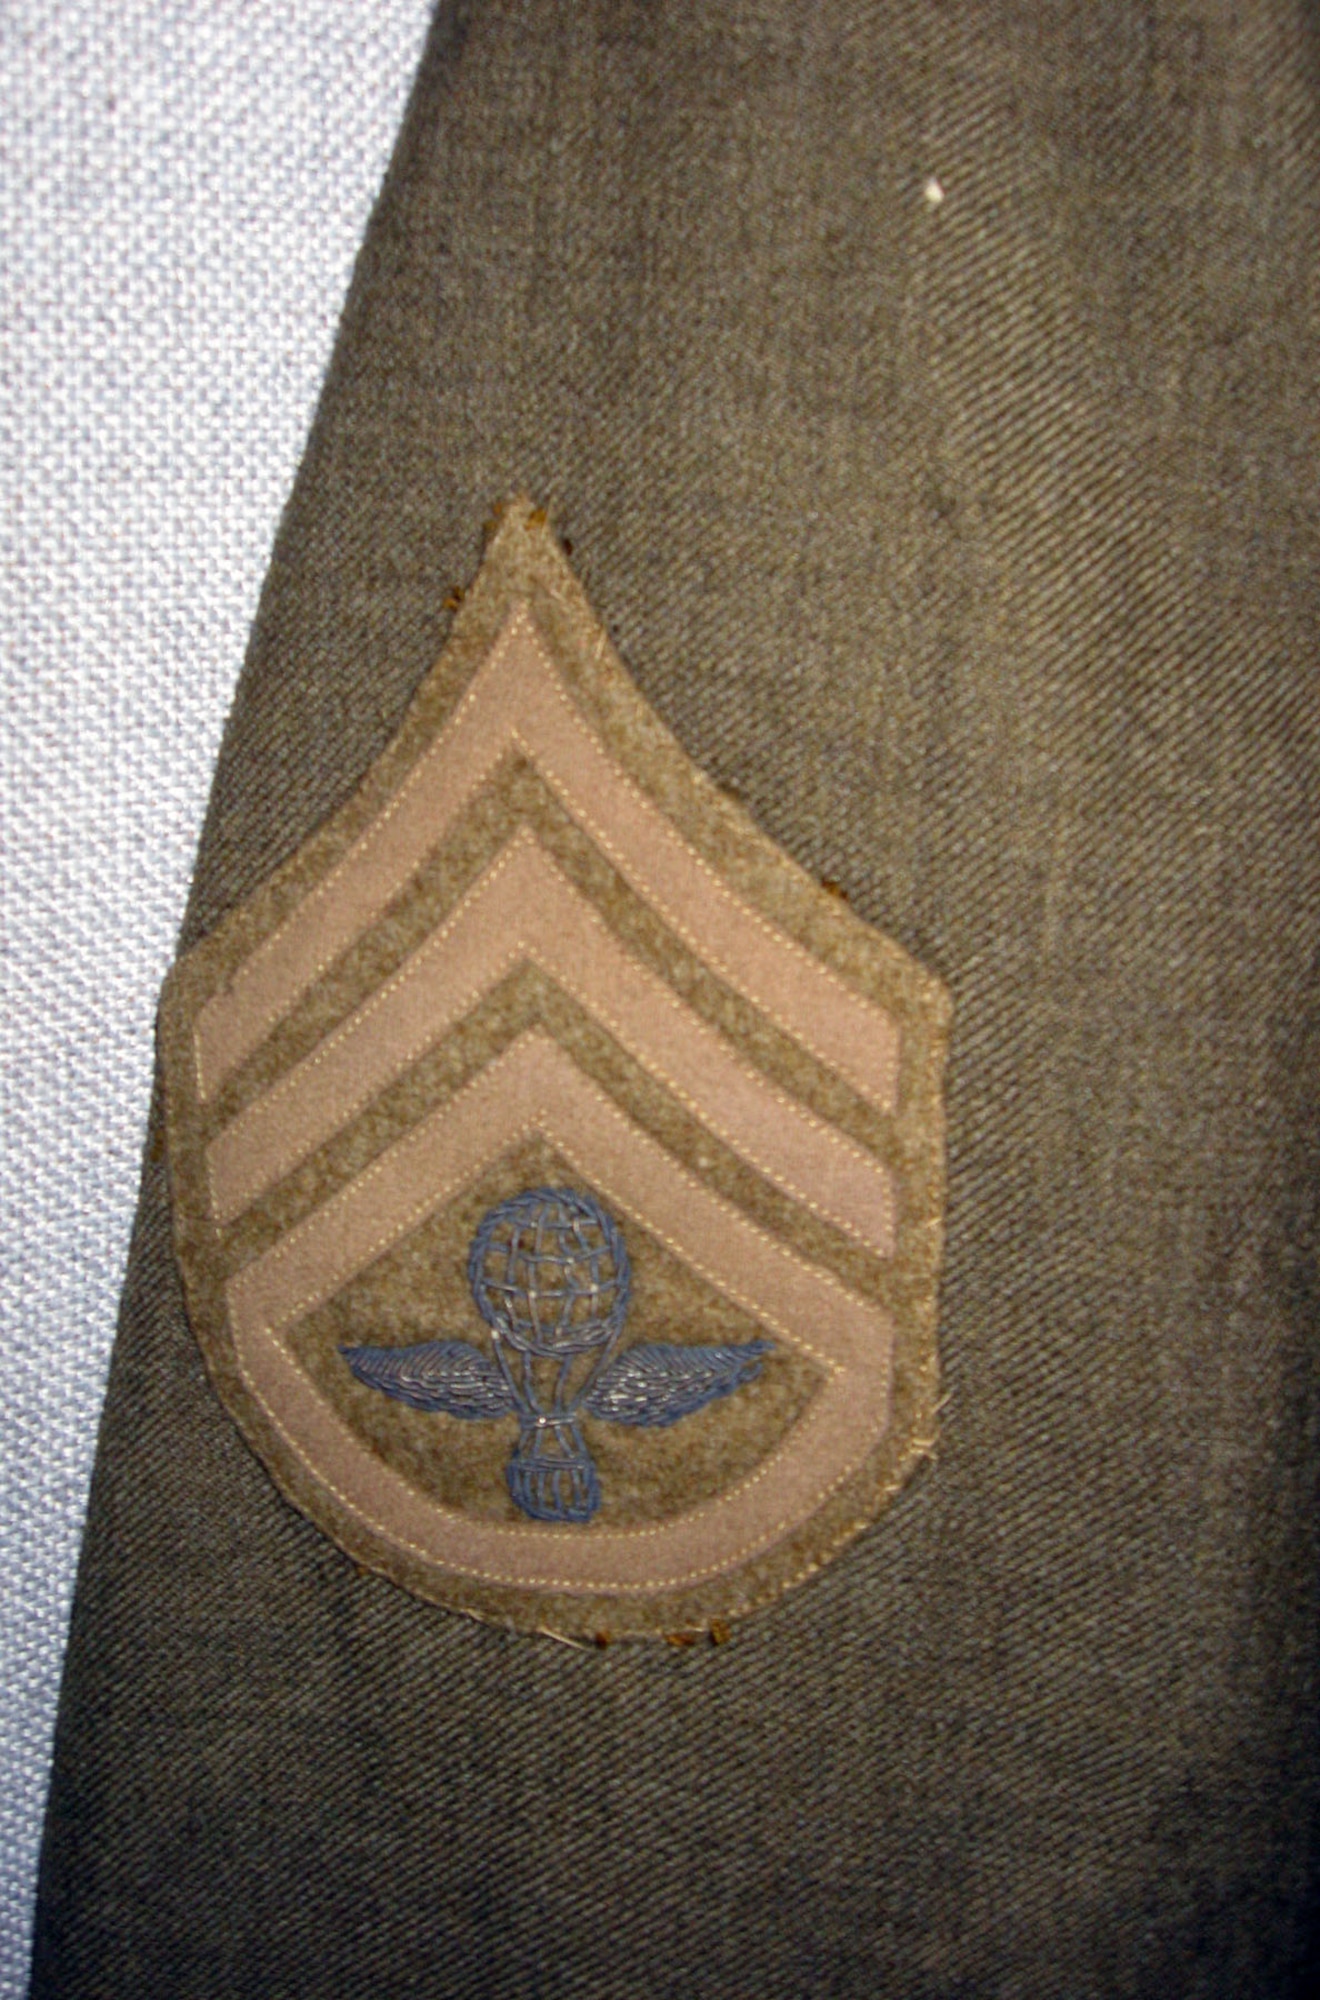 This service coat belonged to William Aulwes who served in World War I. Note the unique balloonist insignia embroidered on the rank chevron. (U.S. Air Force photo)